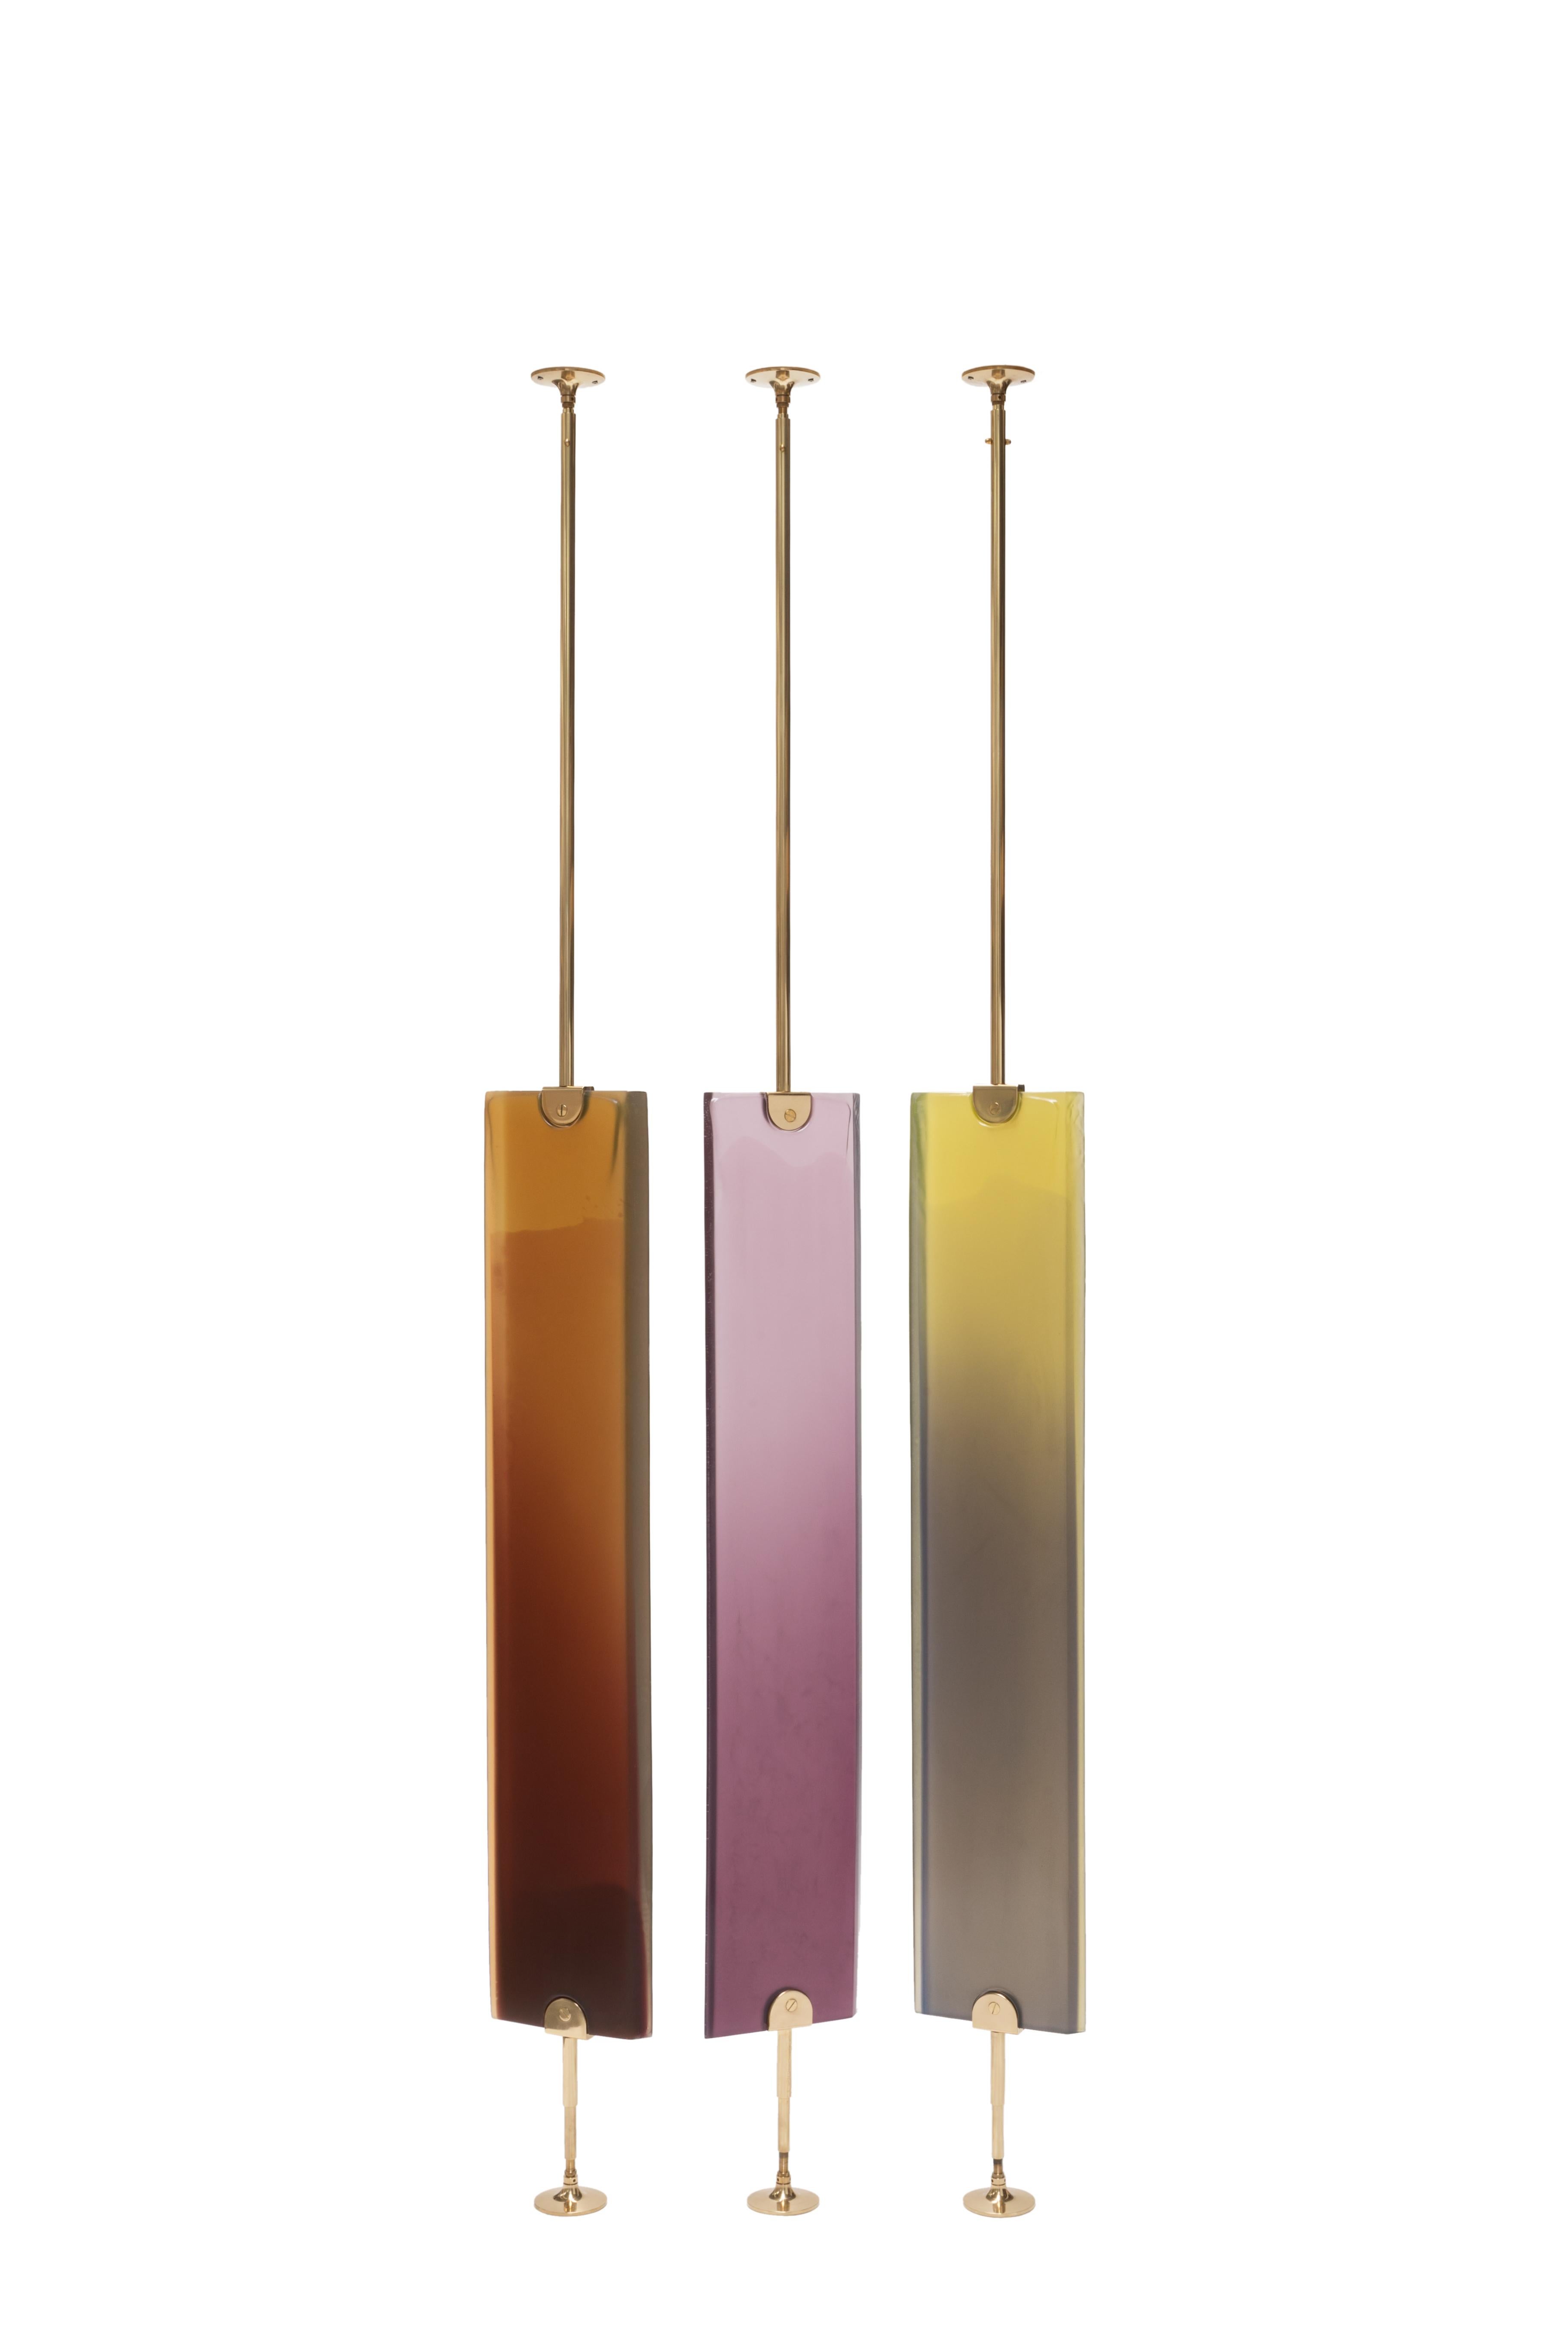 Transparency Matters collection by Draga & Aurel:

Partition screen made from cast resin and self-standing structure in polished brass. Transparency of the resin creates light effects and color nuances.
Handcrafted in our Atelier in Como. Each piece